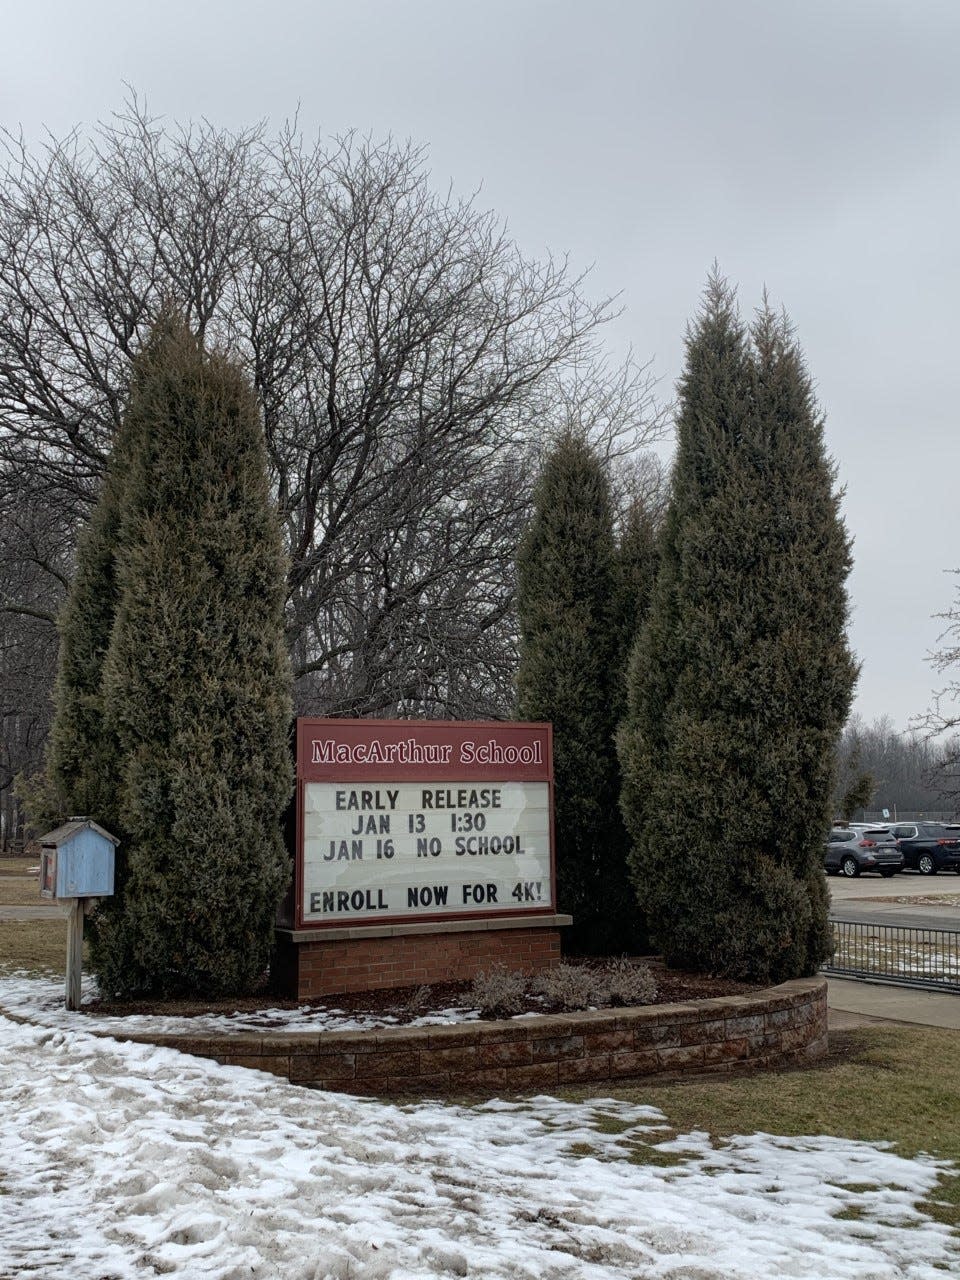 Considering the building's high priority maintenance needs and poor layout of the classrooms, the facilities consulting firm hired by the Green Bay School District told the school board Monday it recommends demolishing MacArthur Elementary, 1331 Hobart Drive.